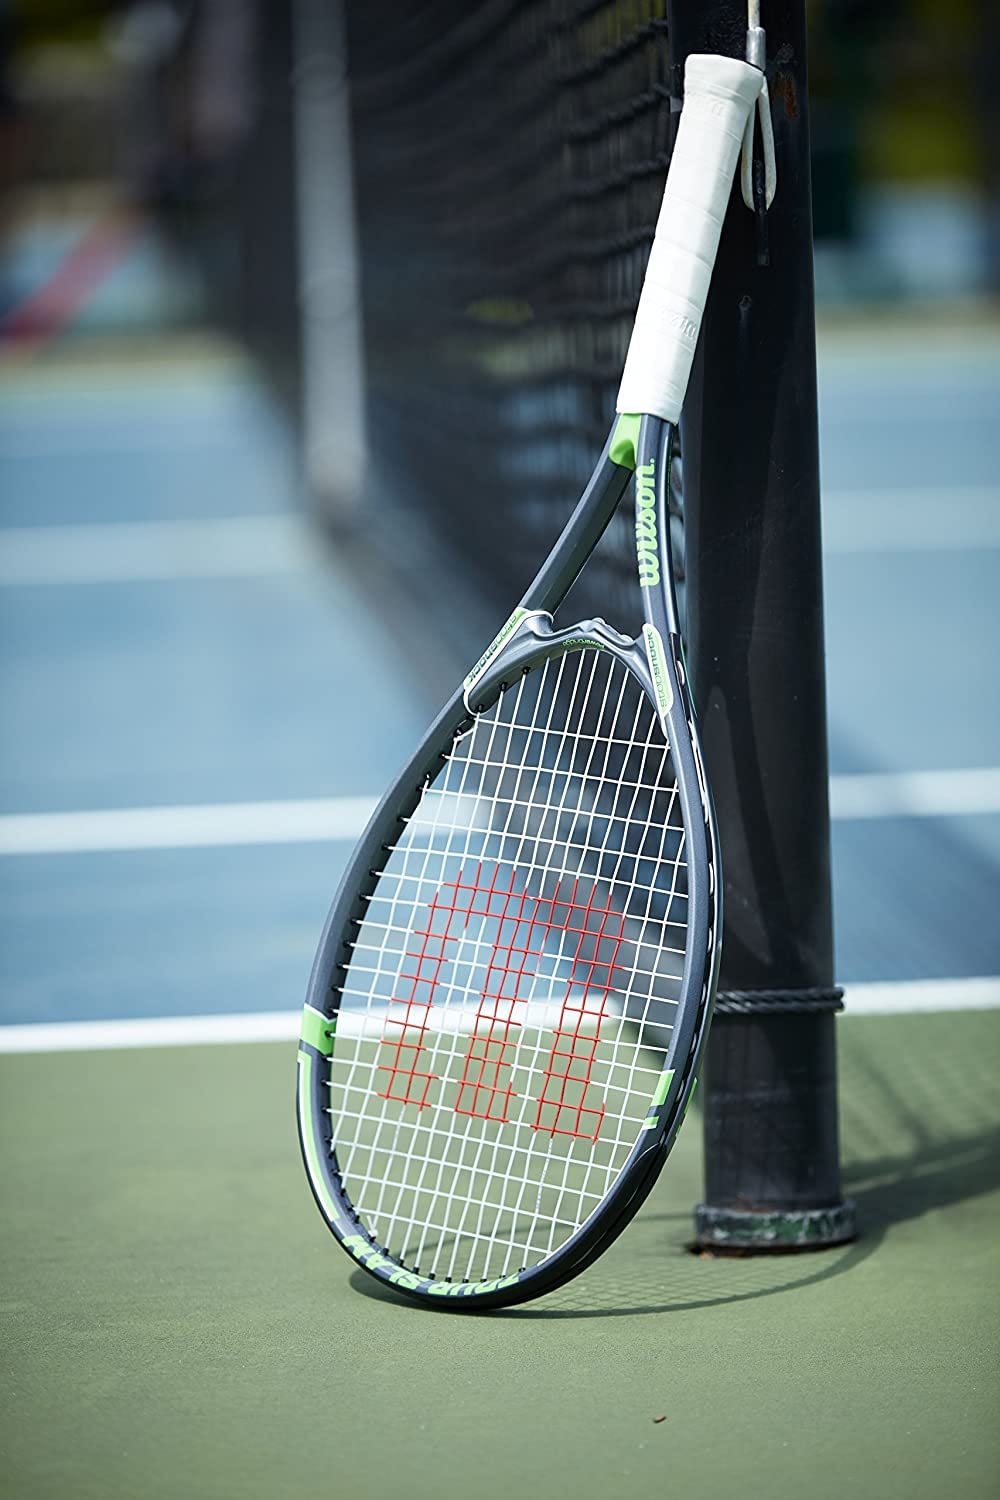 Wilson Tour Slam Adult Strung Tennis Racket Review: Worth Buying?